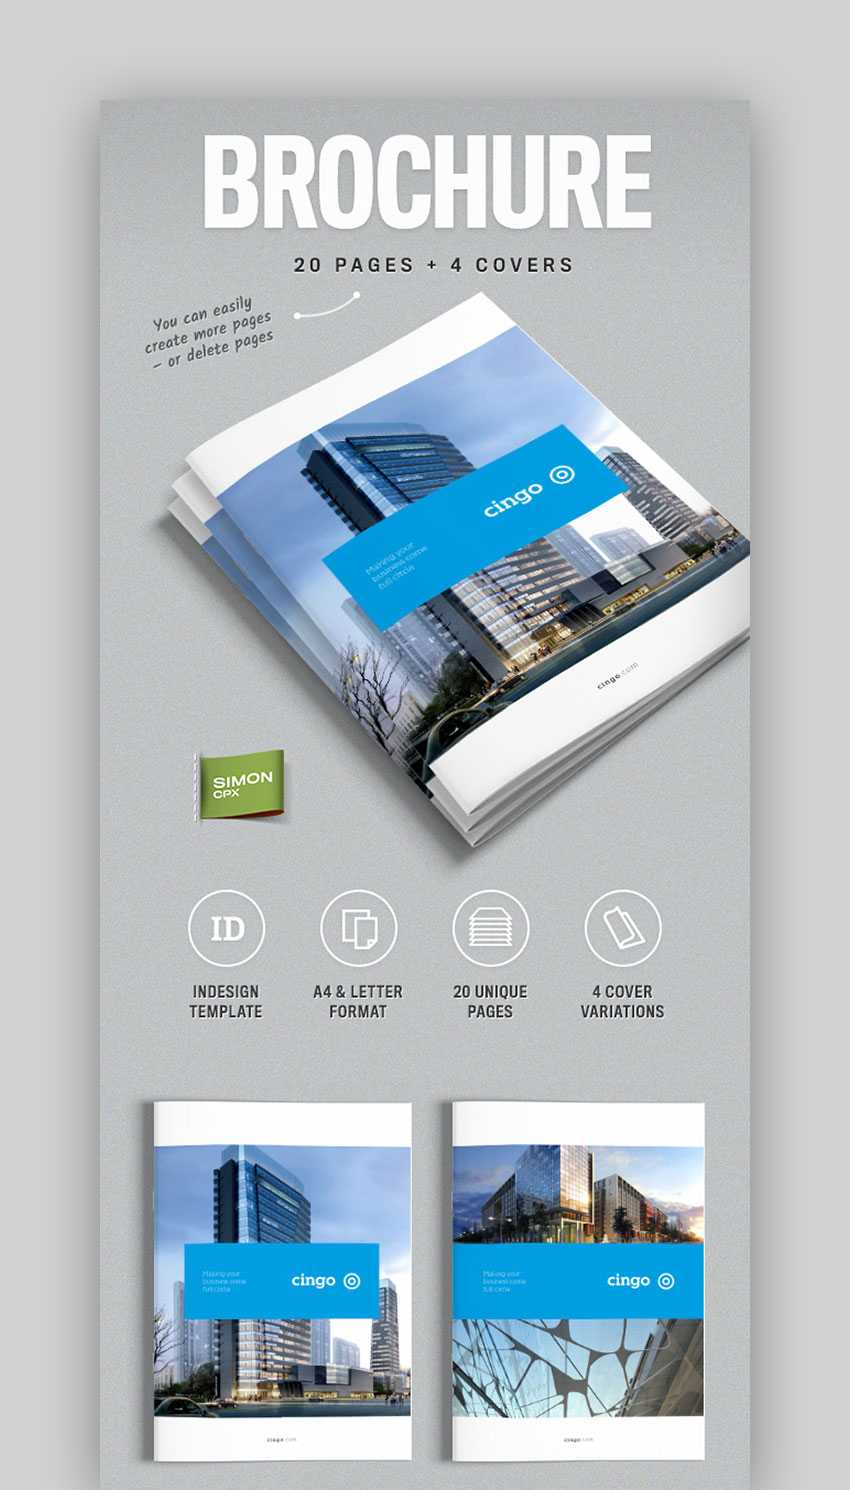 35 Best Indesign Brochure Templates – Creative Business With Good Brochure Templates